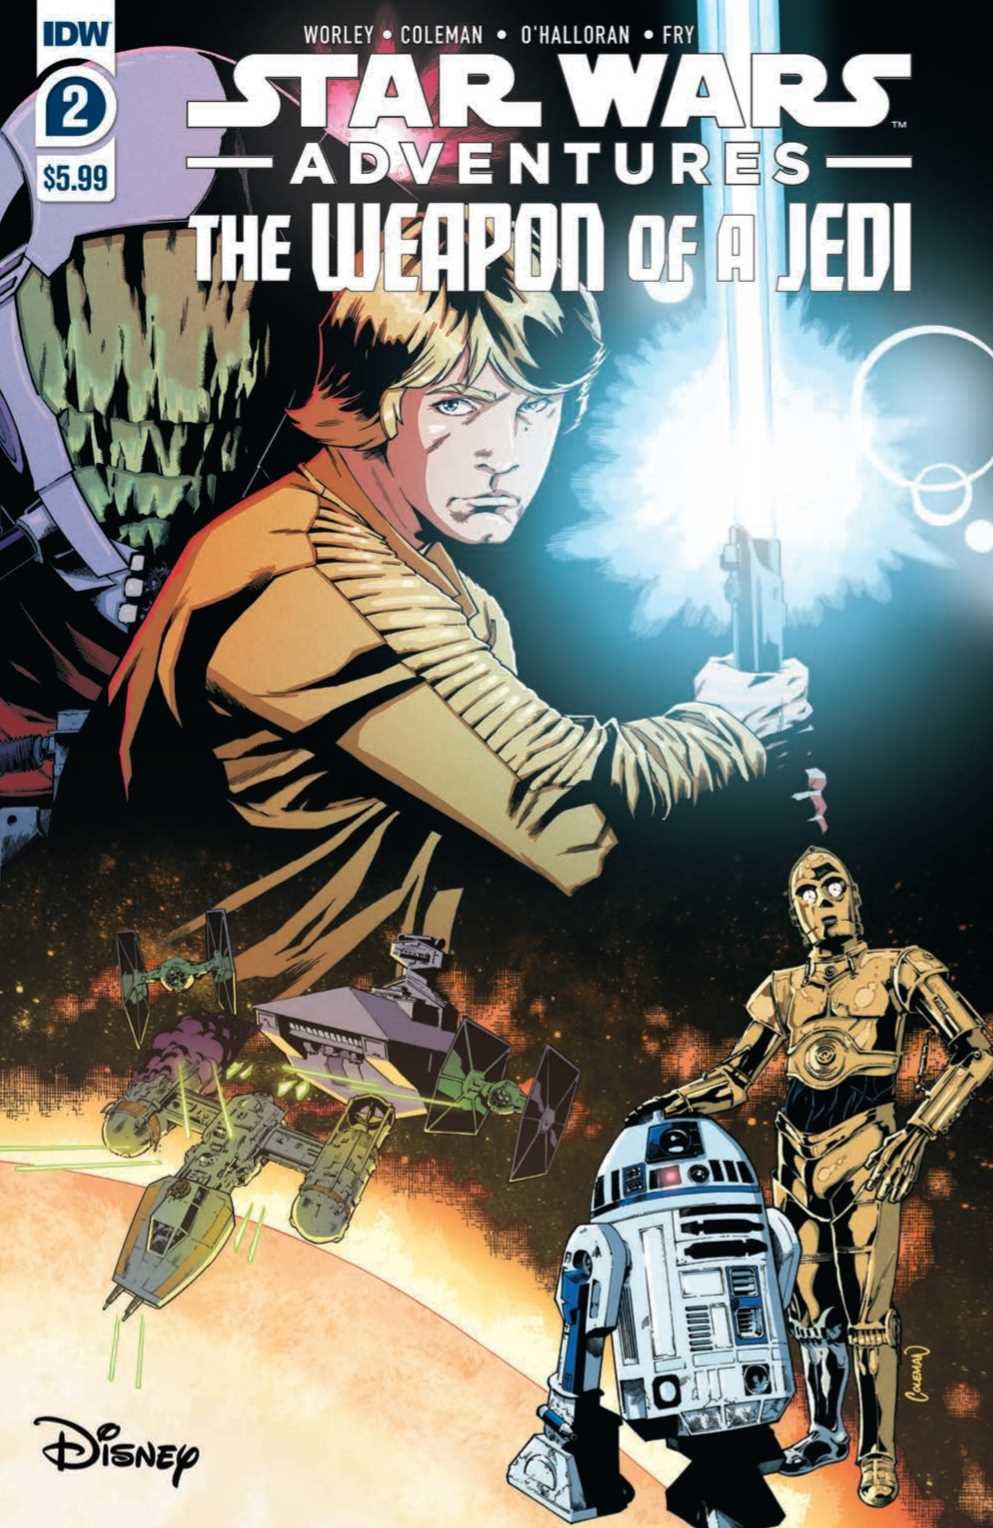 Star Wars Adventures Weapon of A Jedi #2 (Of 2)